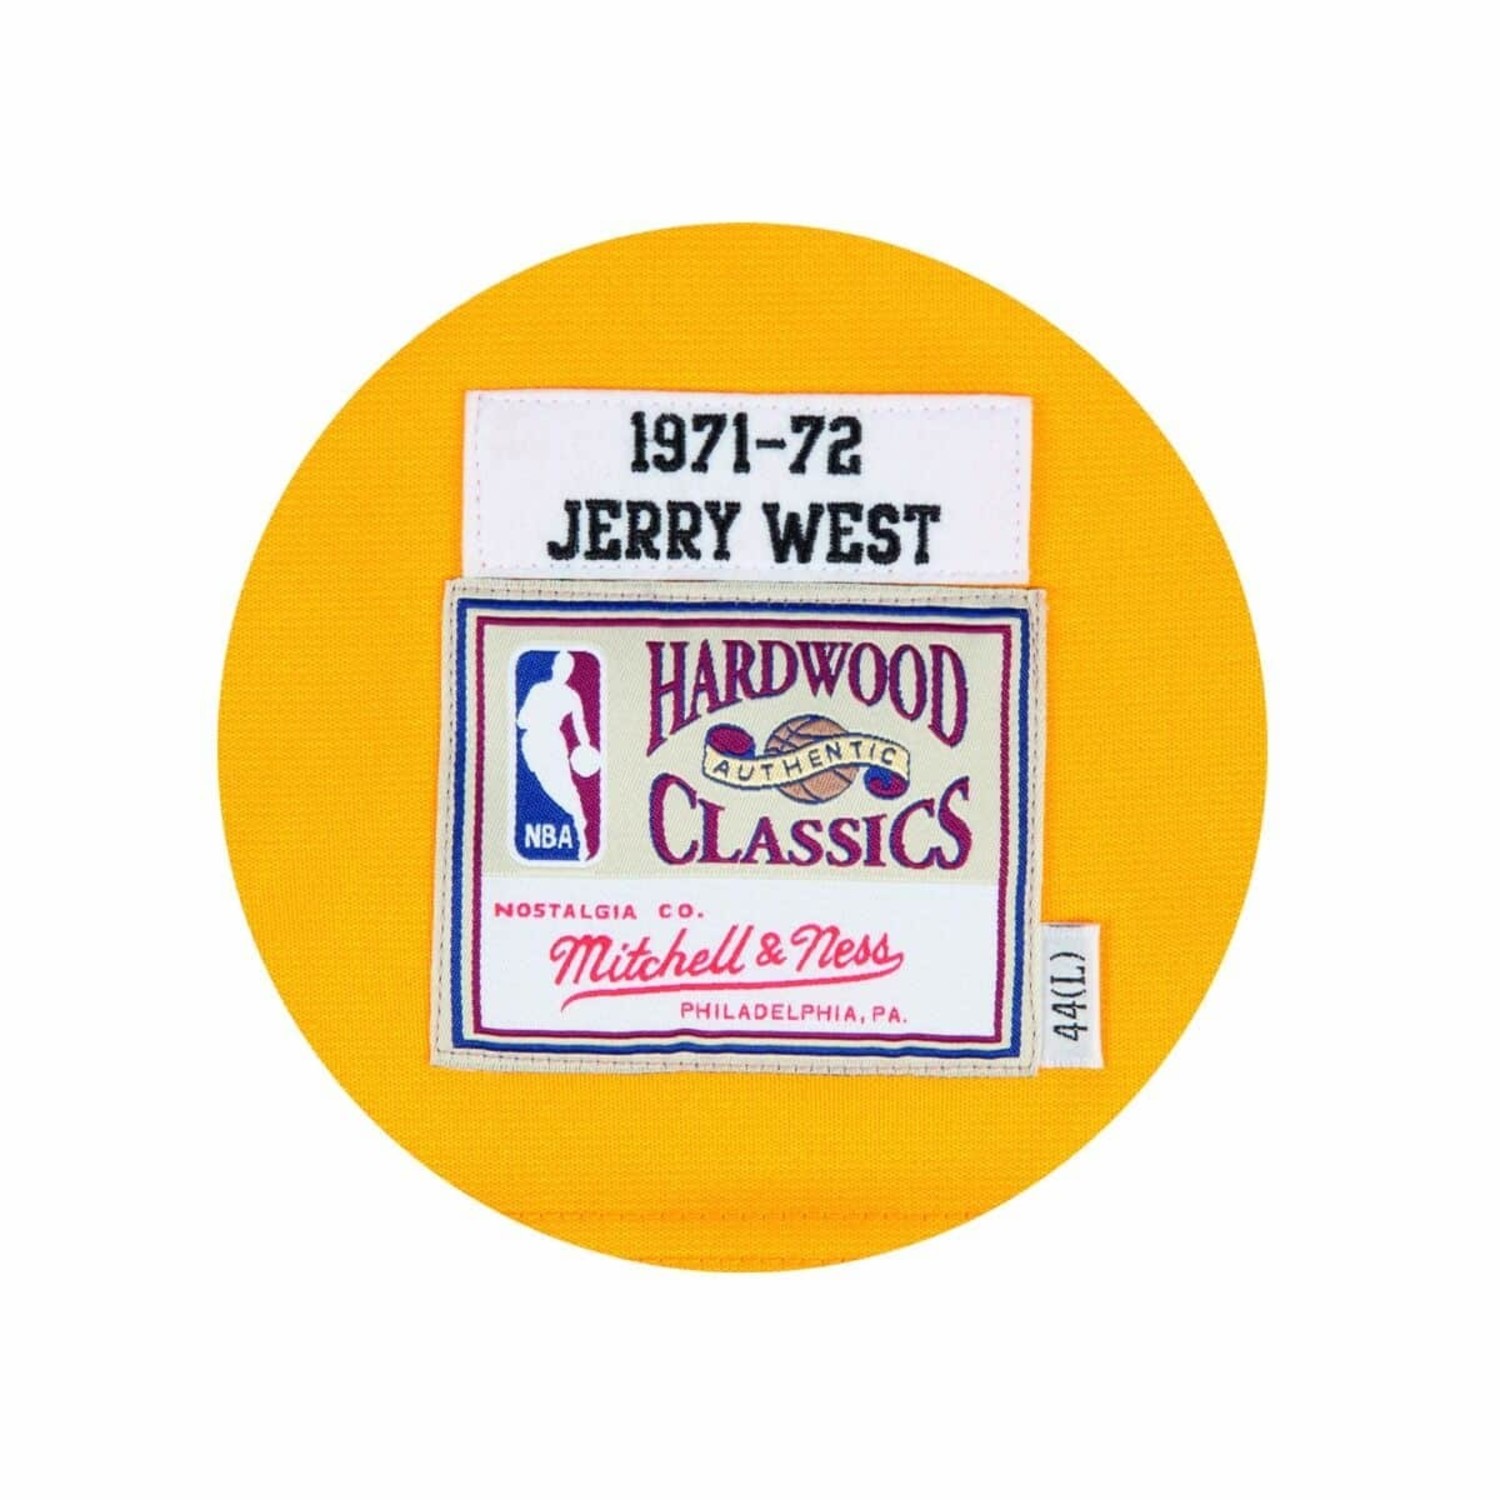 NBA HARDWOOD Classic Los Angeles Lakers Jerry West Jersey for